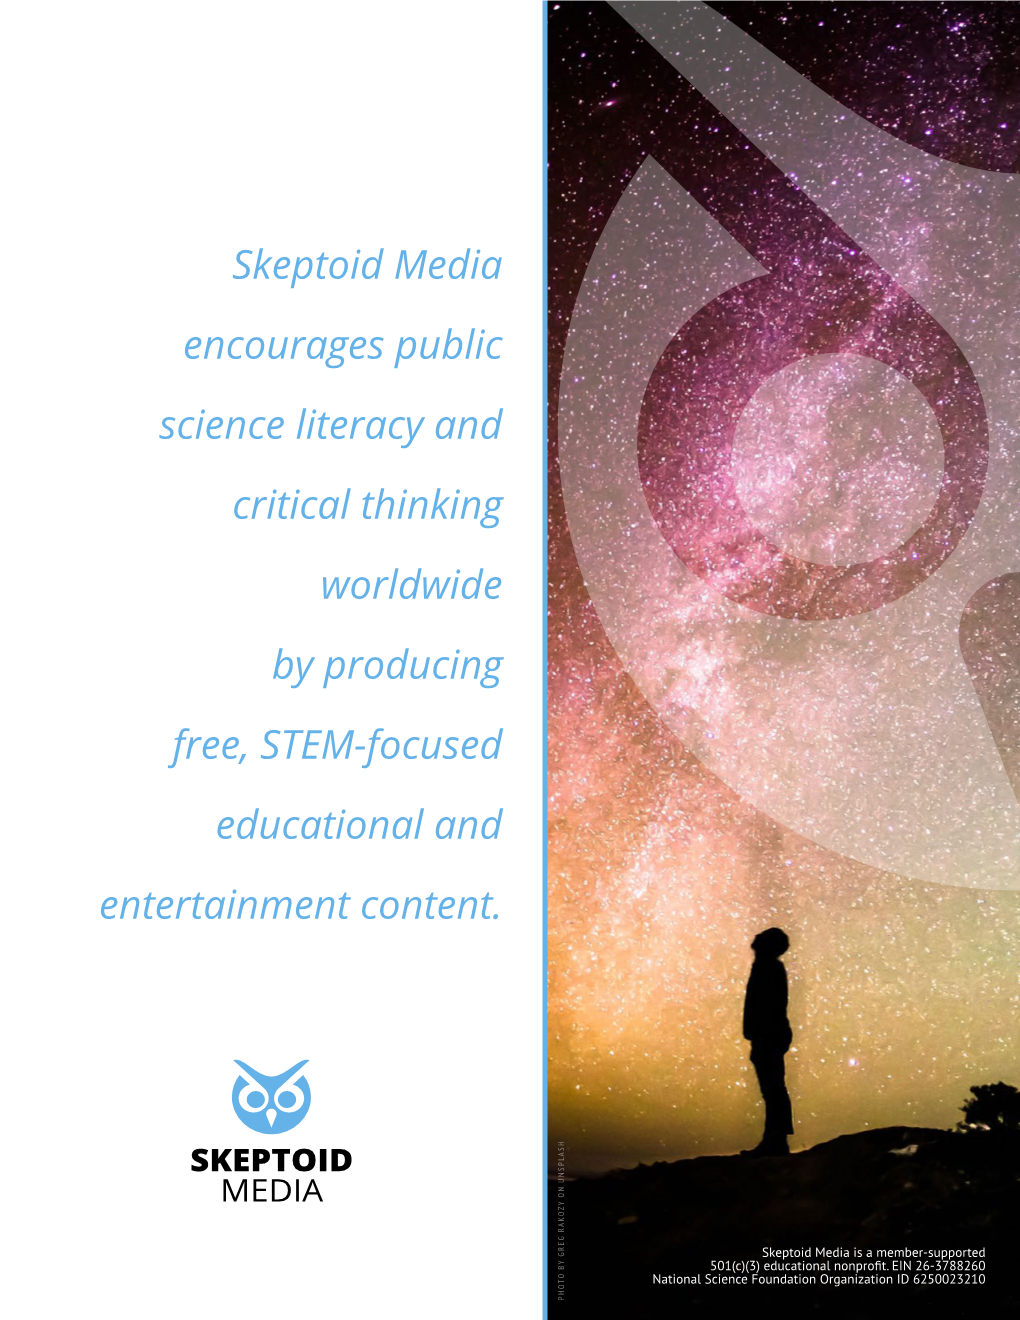 Skeptoid Media Encourages Public Science Literacy and Critical Thinking